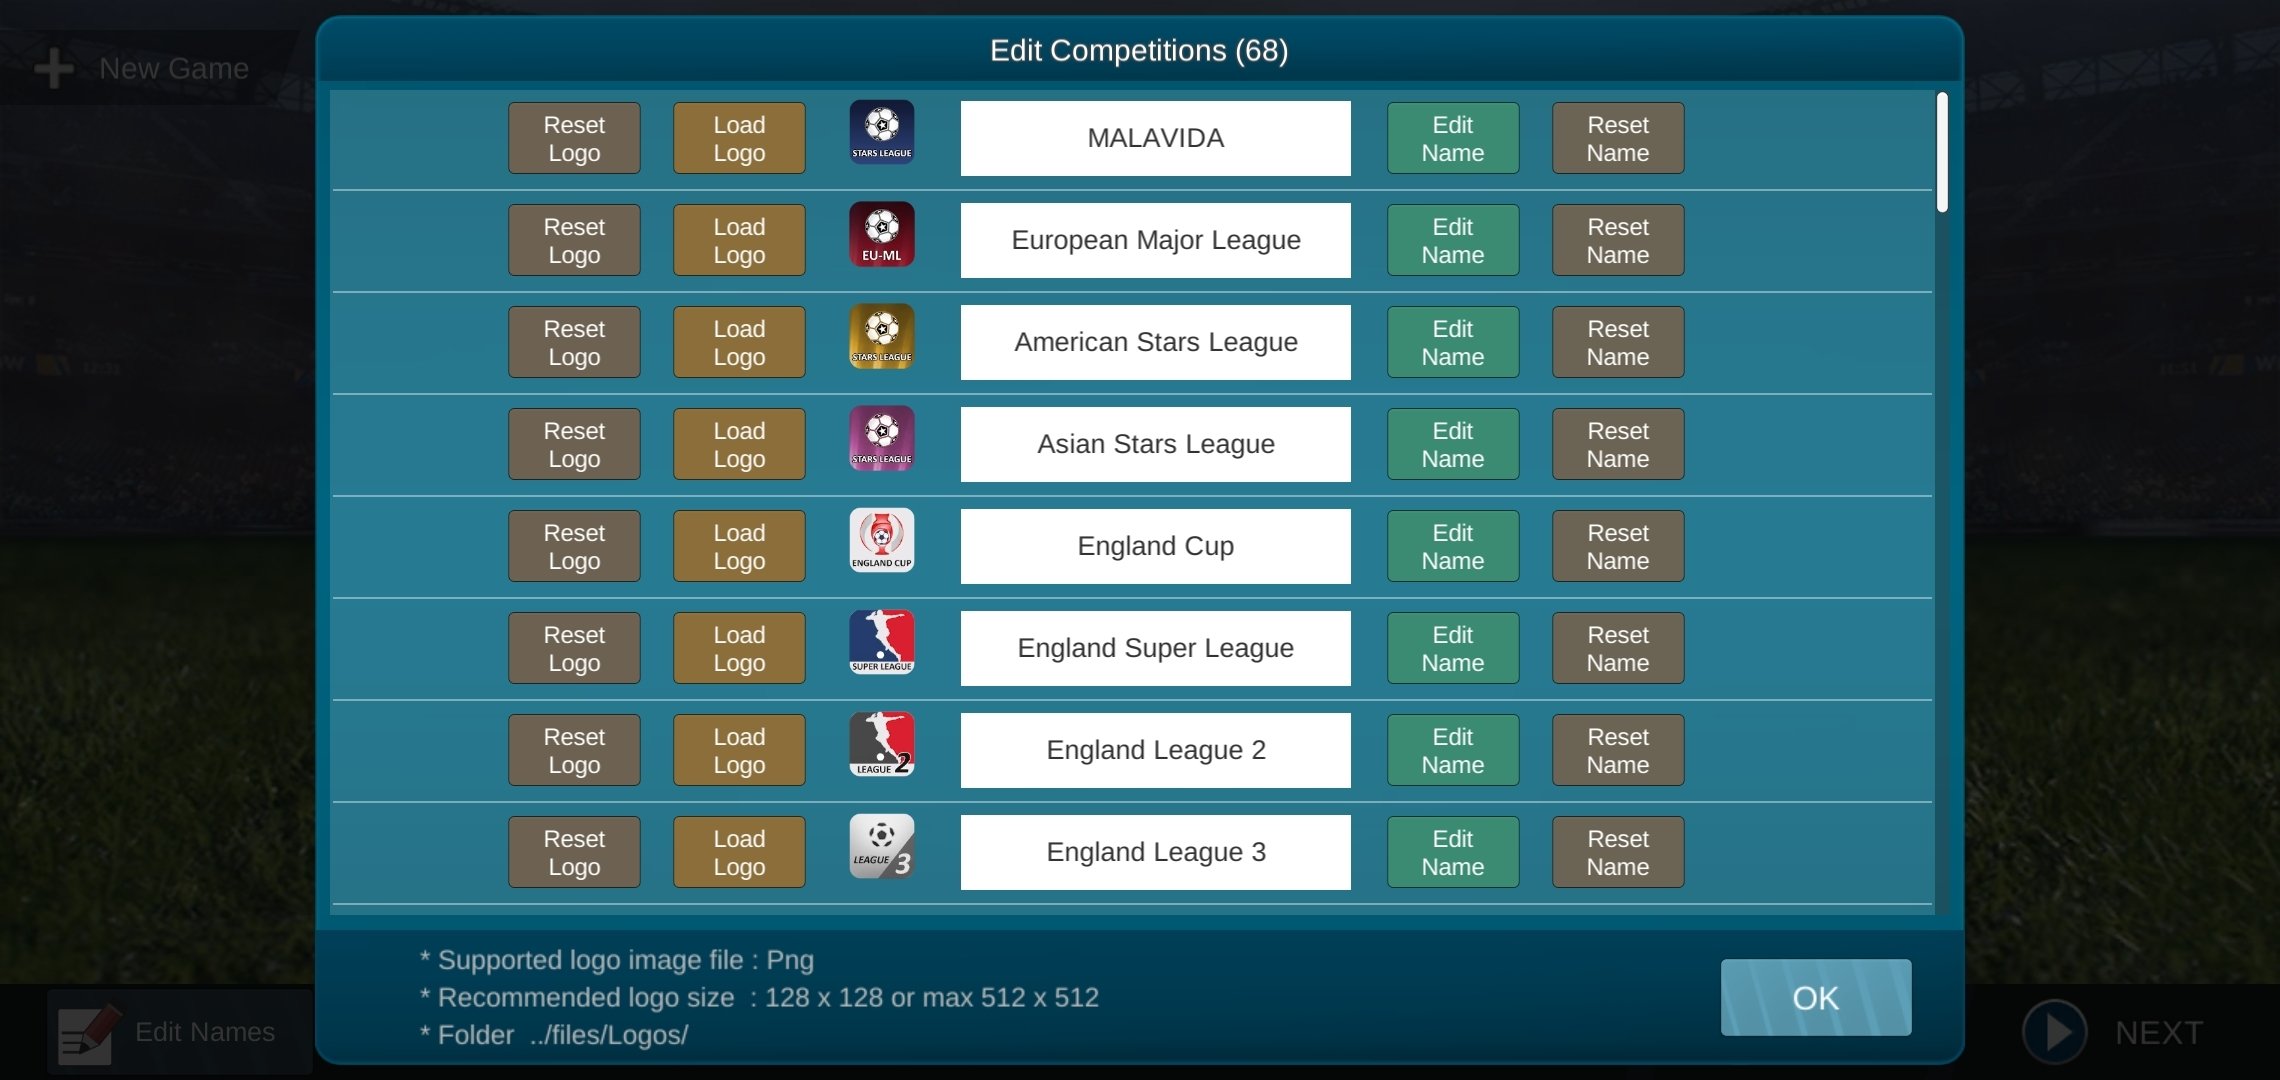 Download Dream League Soccer 2024 APKs for Android - APKMirror